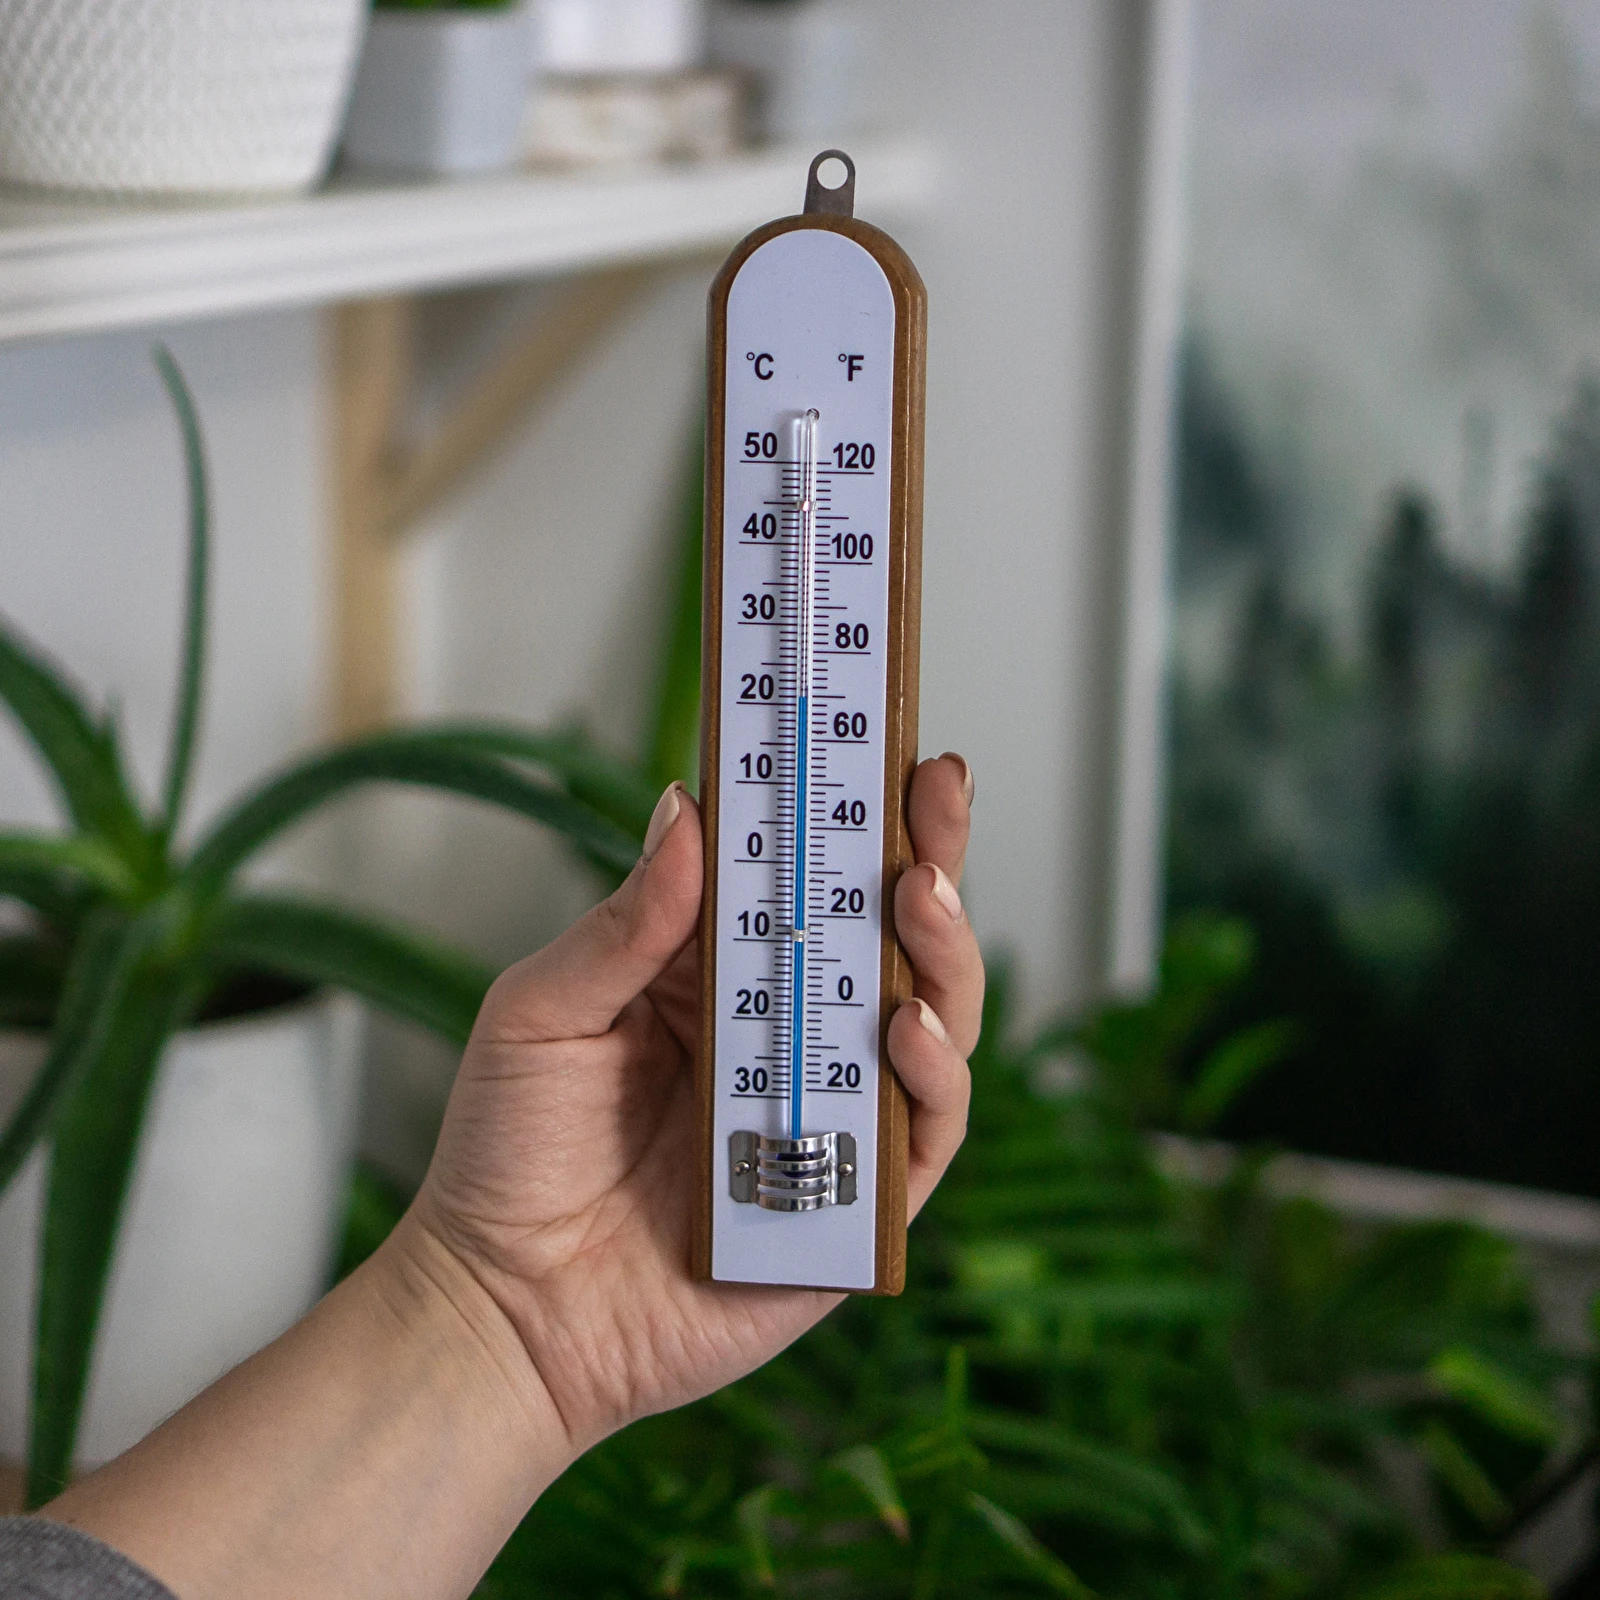 https://browin.com/static/images/1600/room-thermometer-with-white-scale-30-c-to-50-c-20cm-012600_5.webp